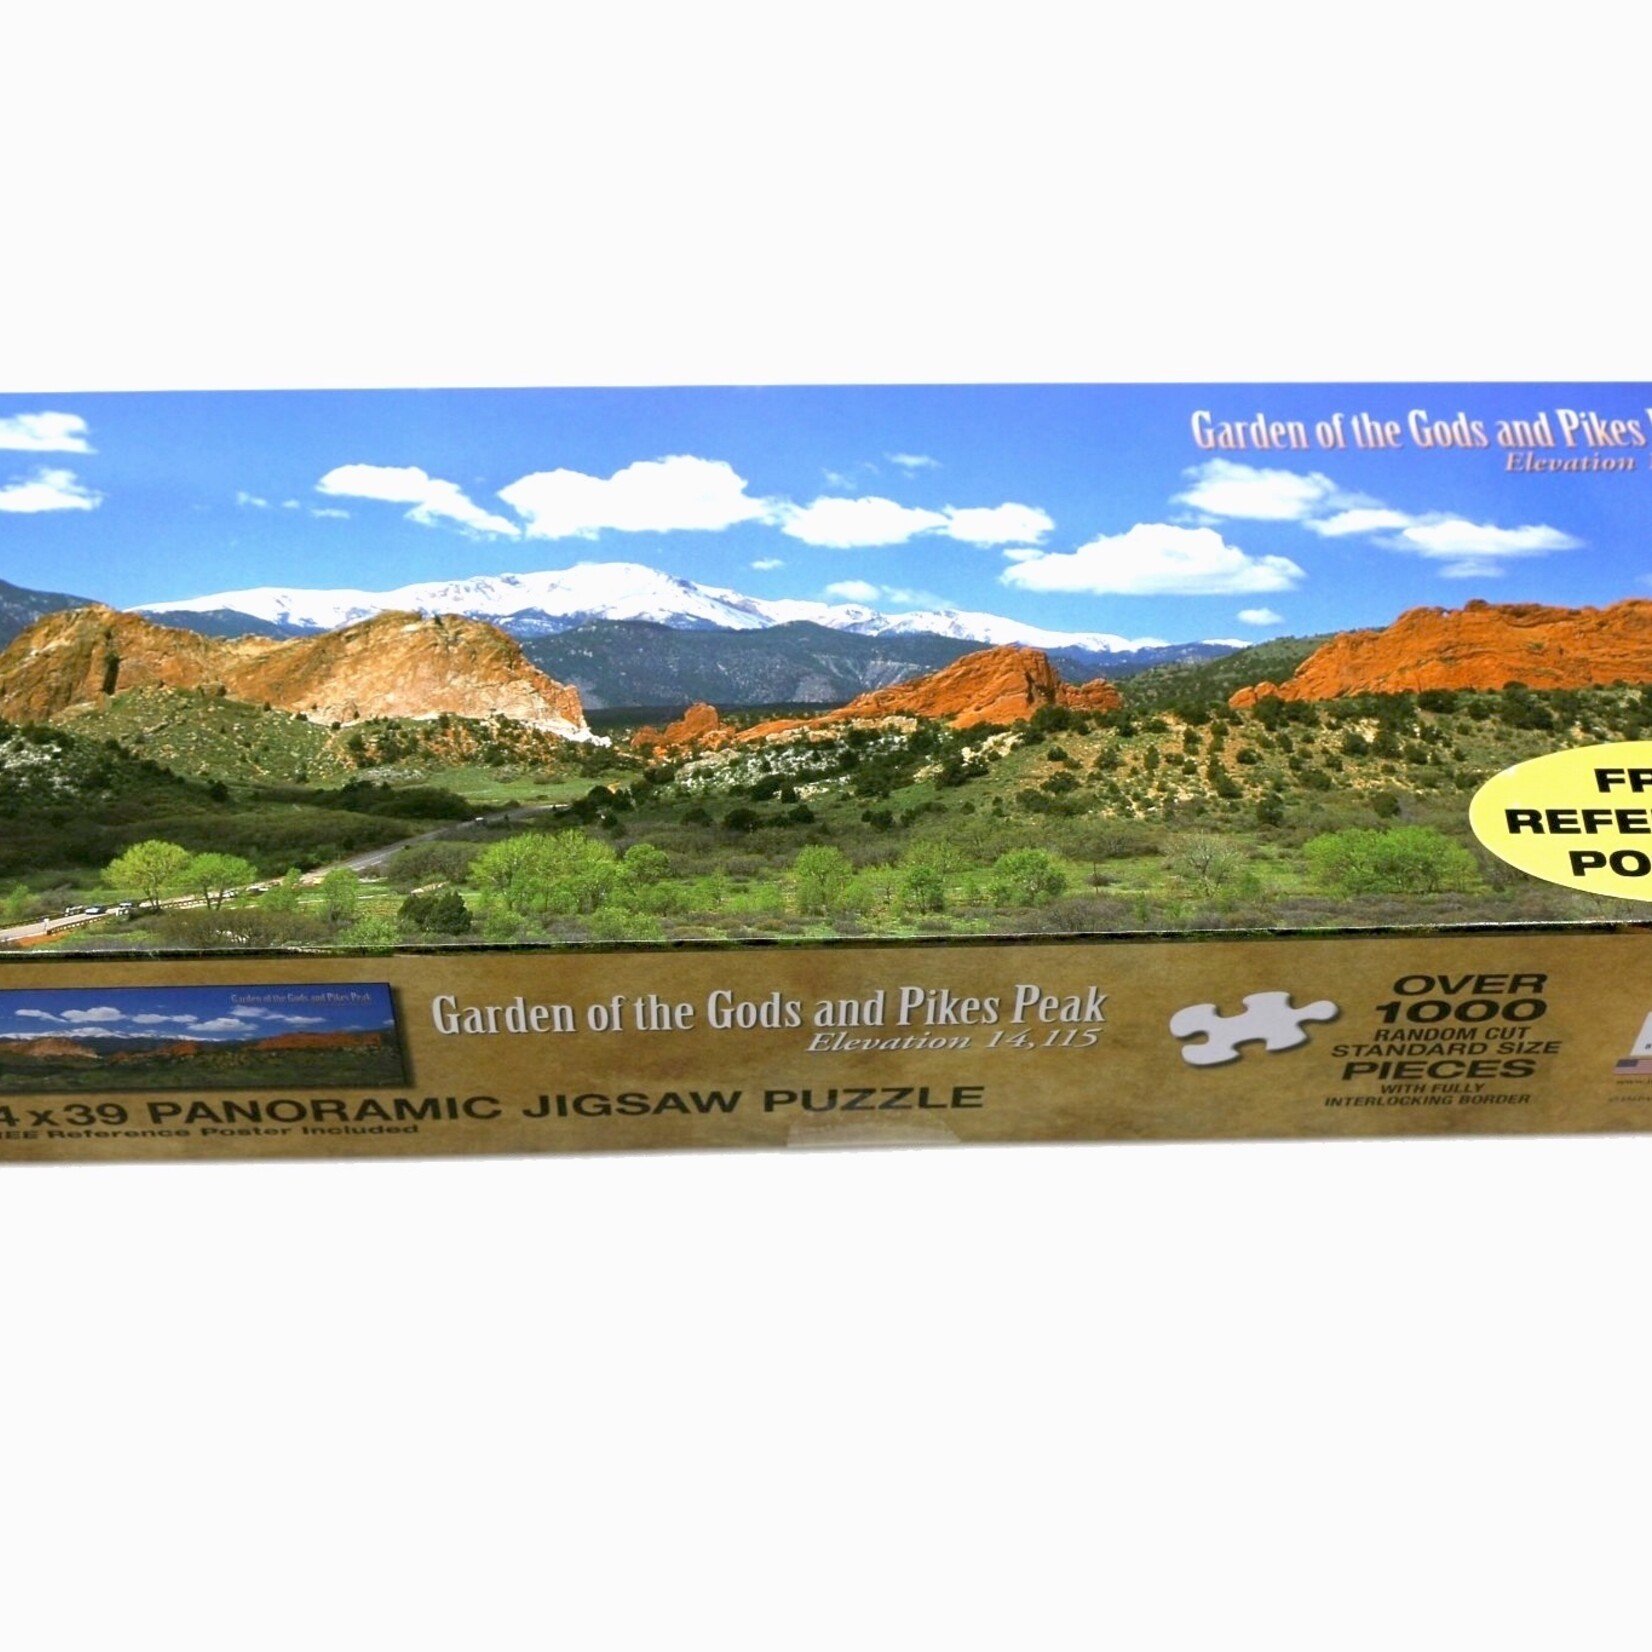 IMPACT COLORADO Garden of the Gods and Pikes Peak Panoramic Jigsaw Puzzle